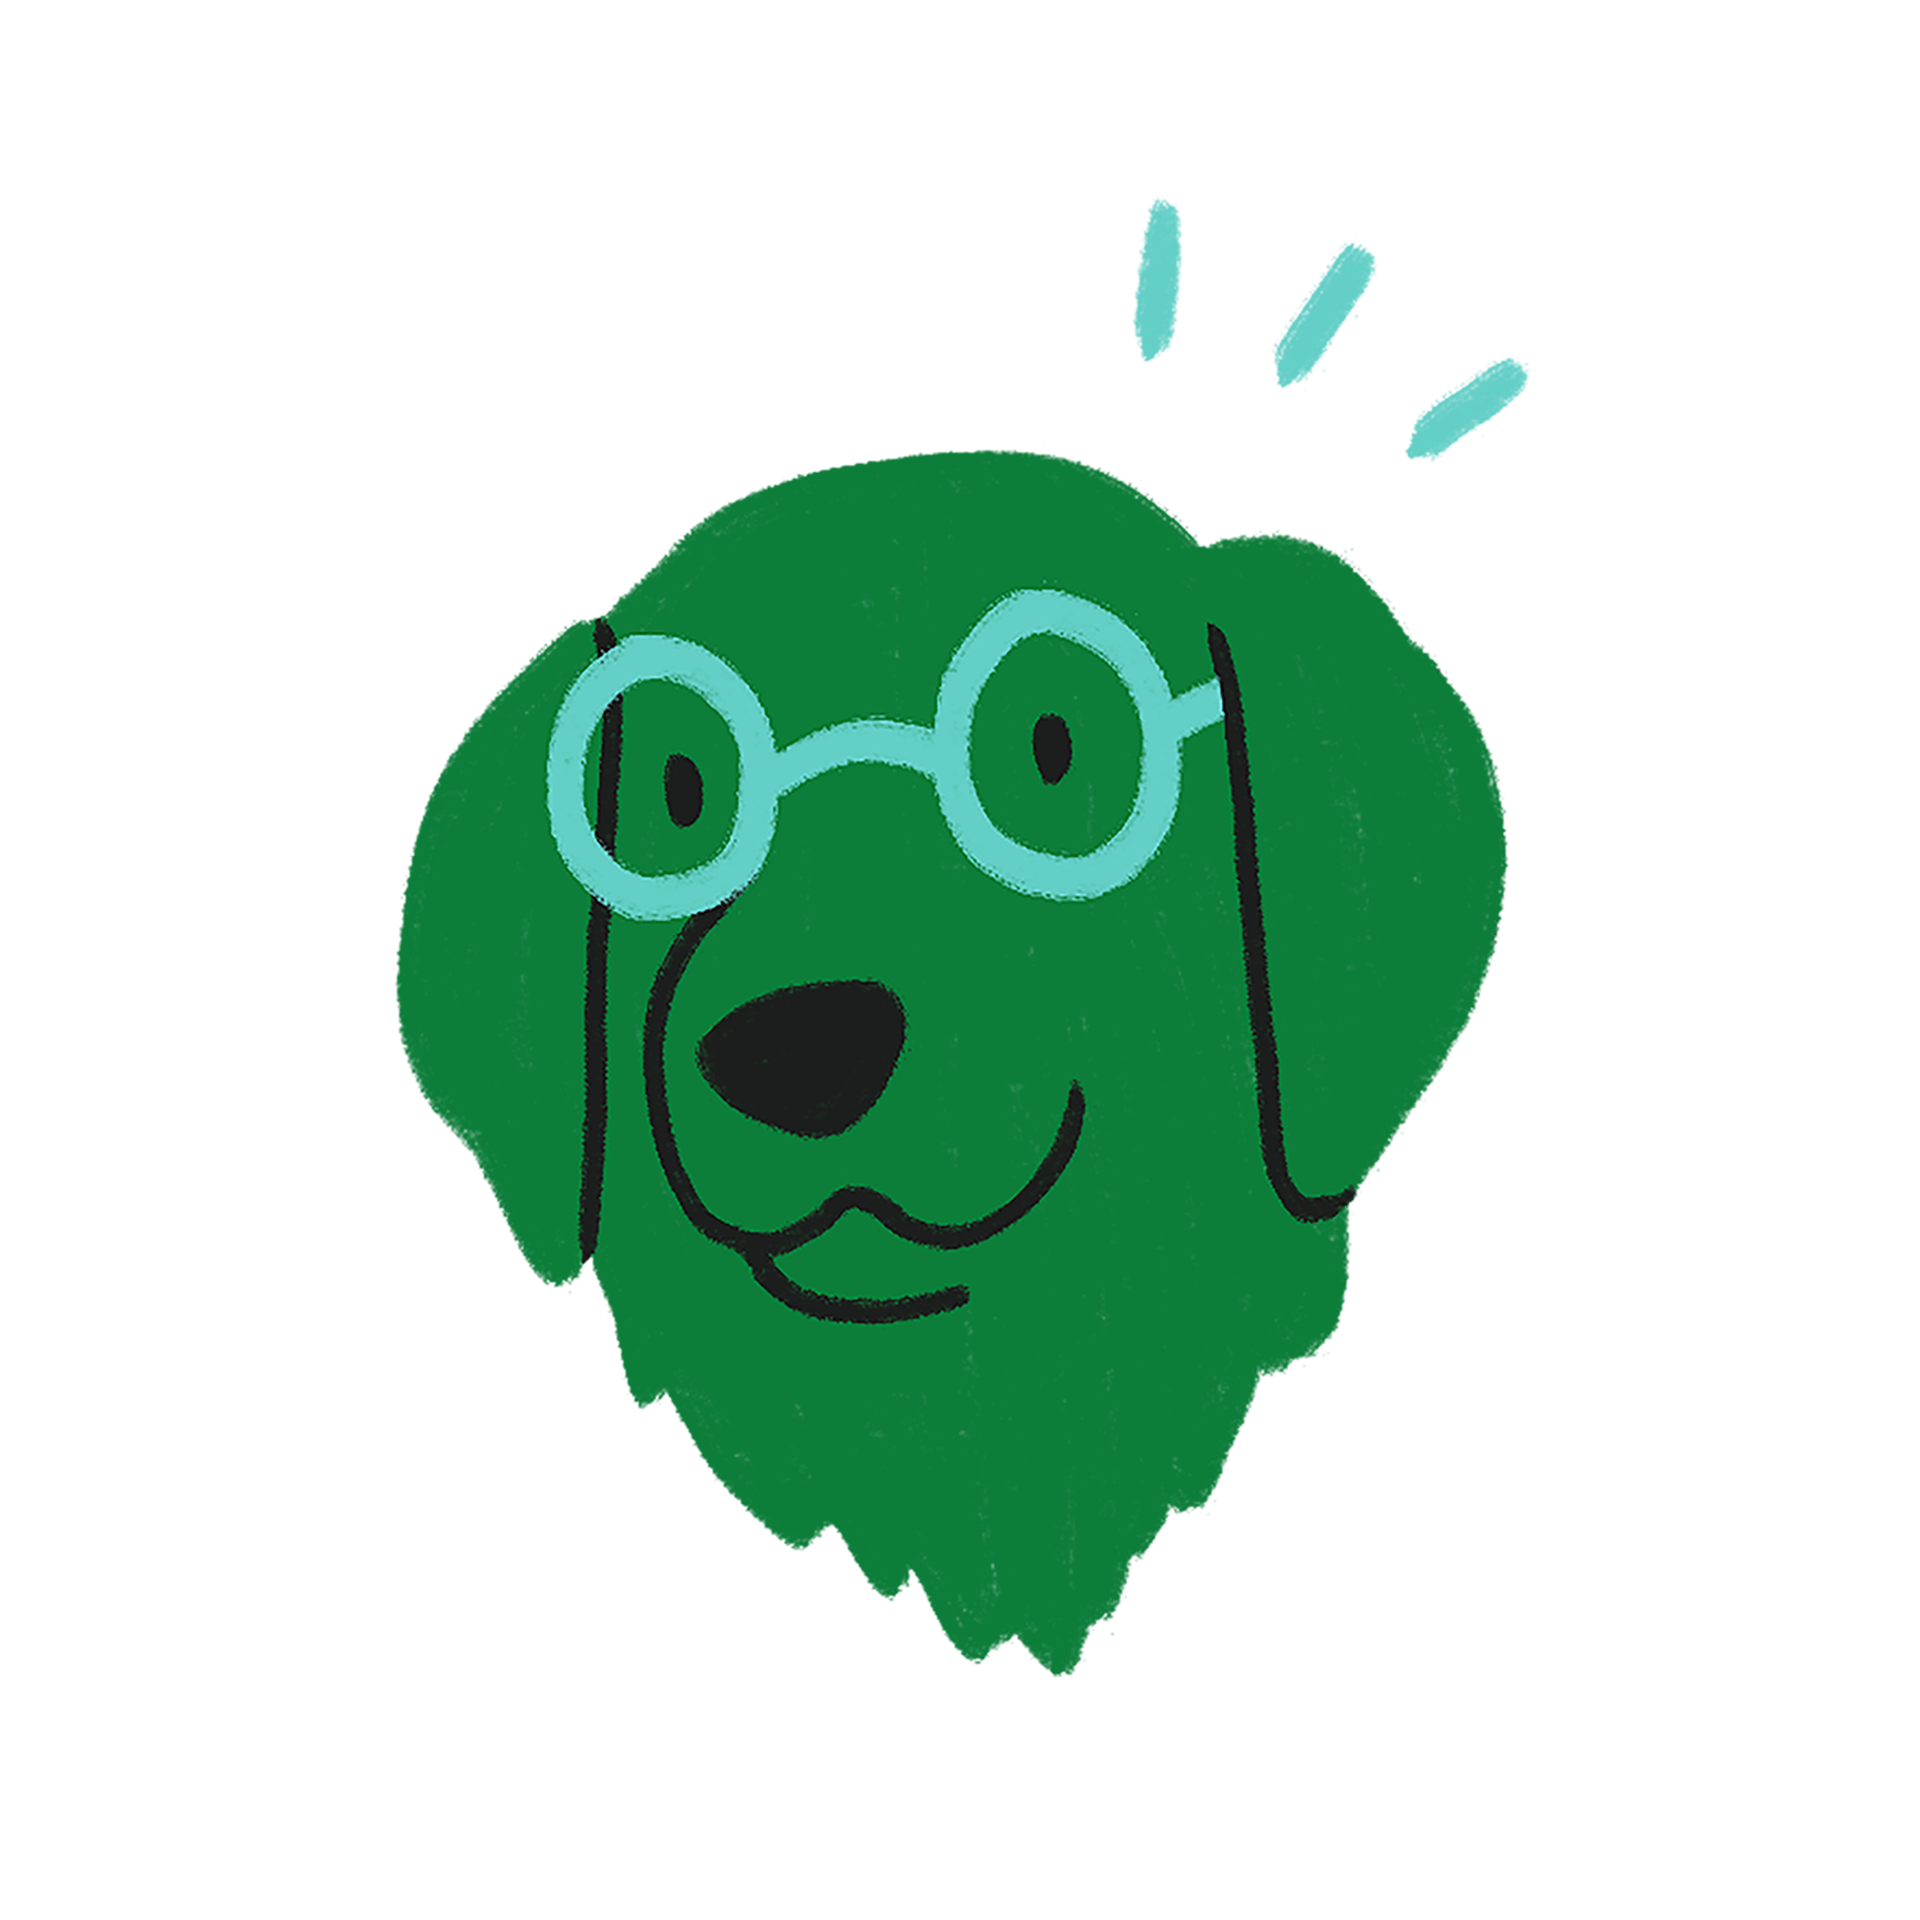 Illustration of a green dog with blue glasses on